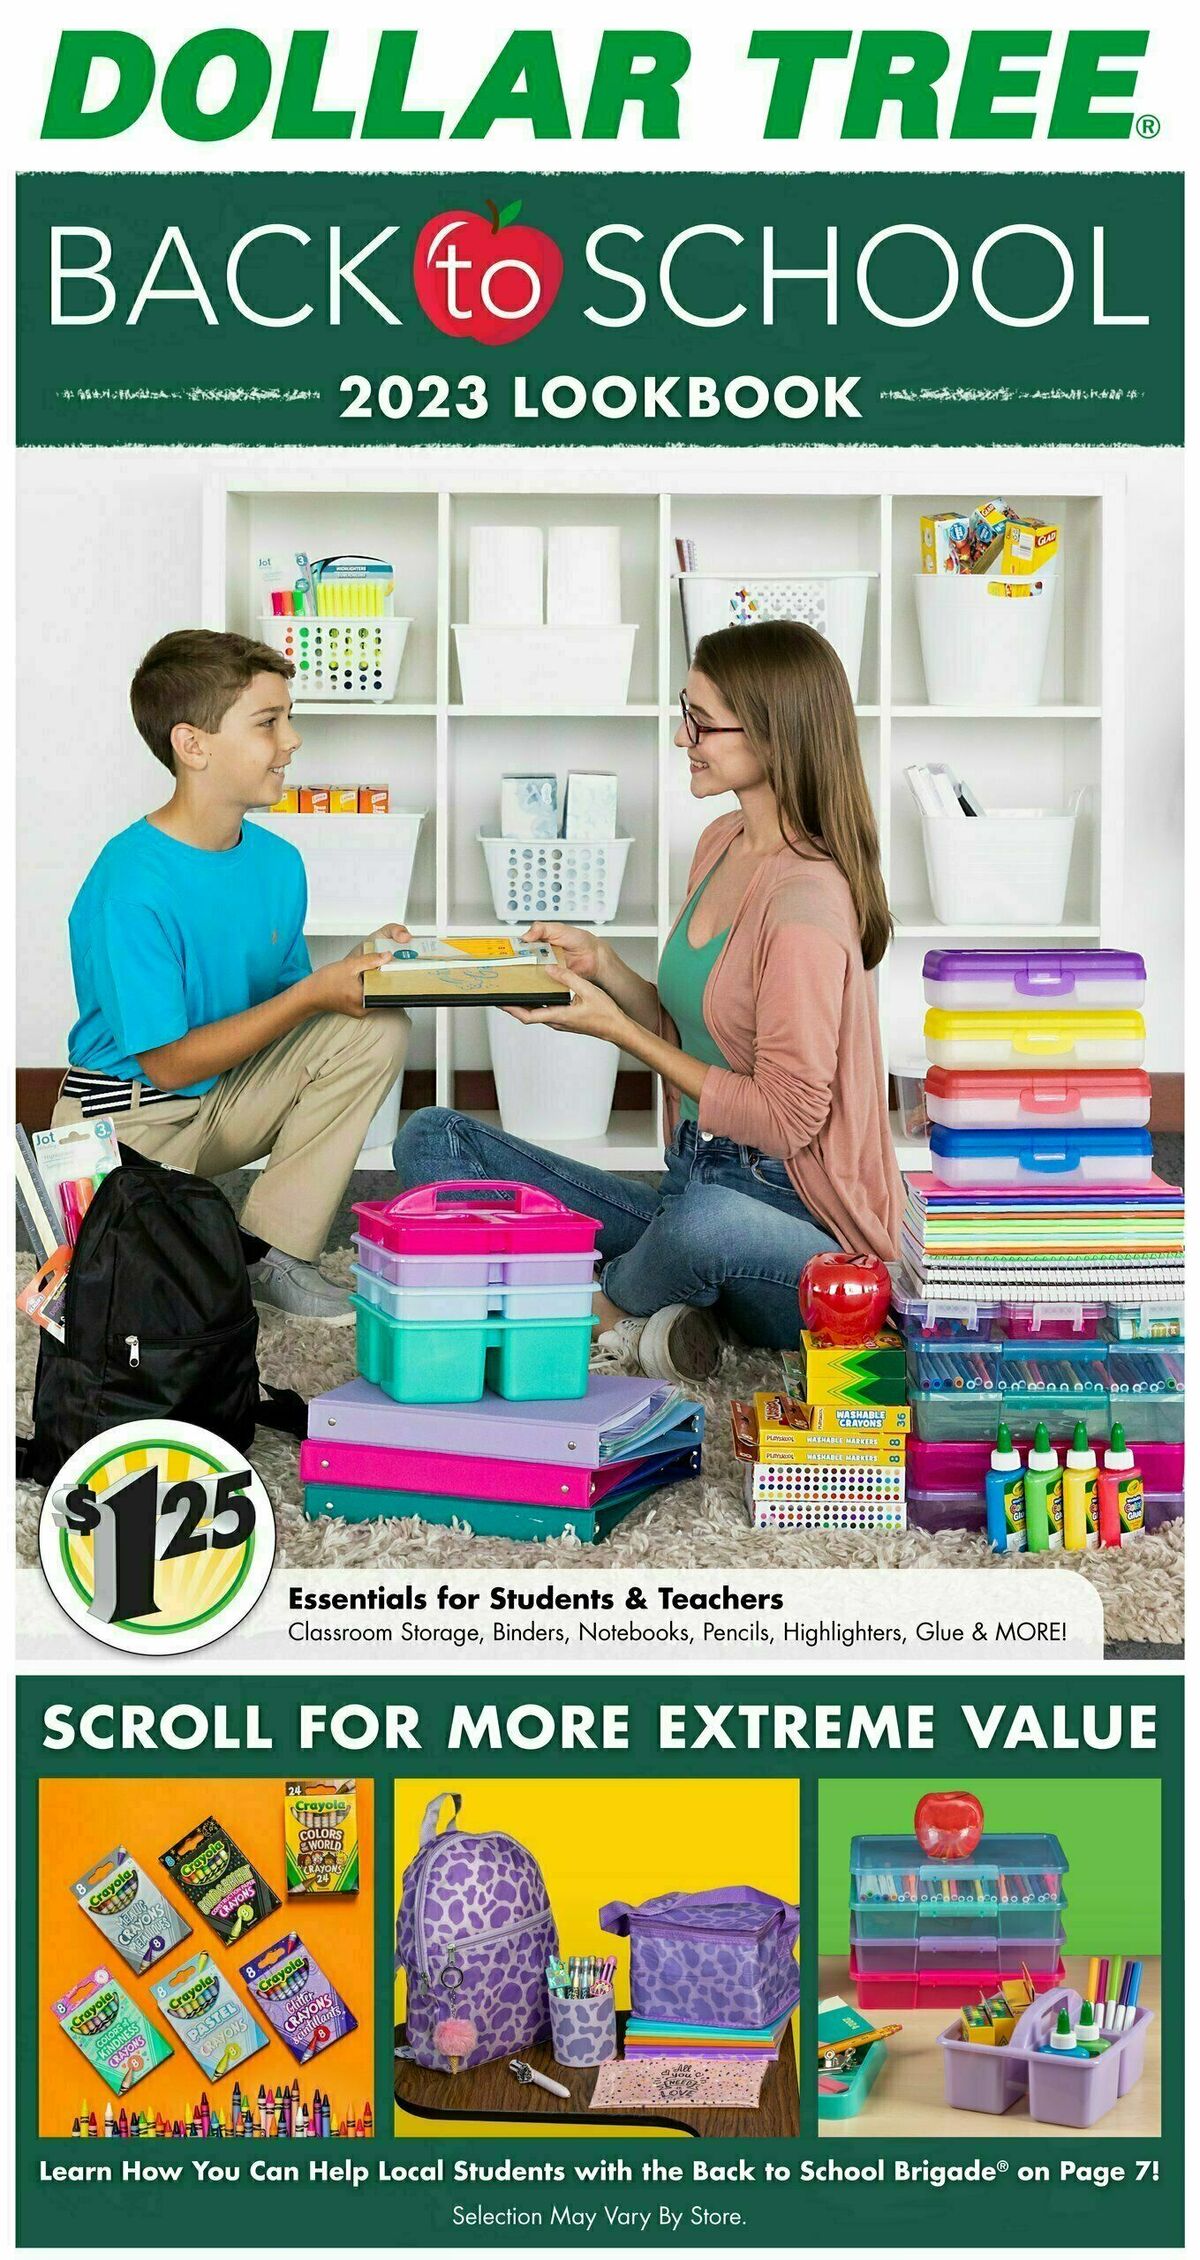 Dollar Tree Weekly Ad from July 5